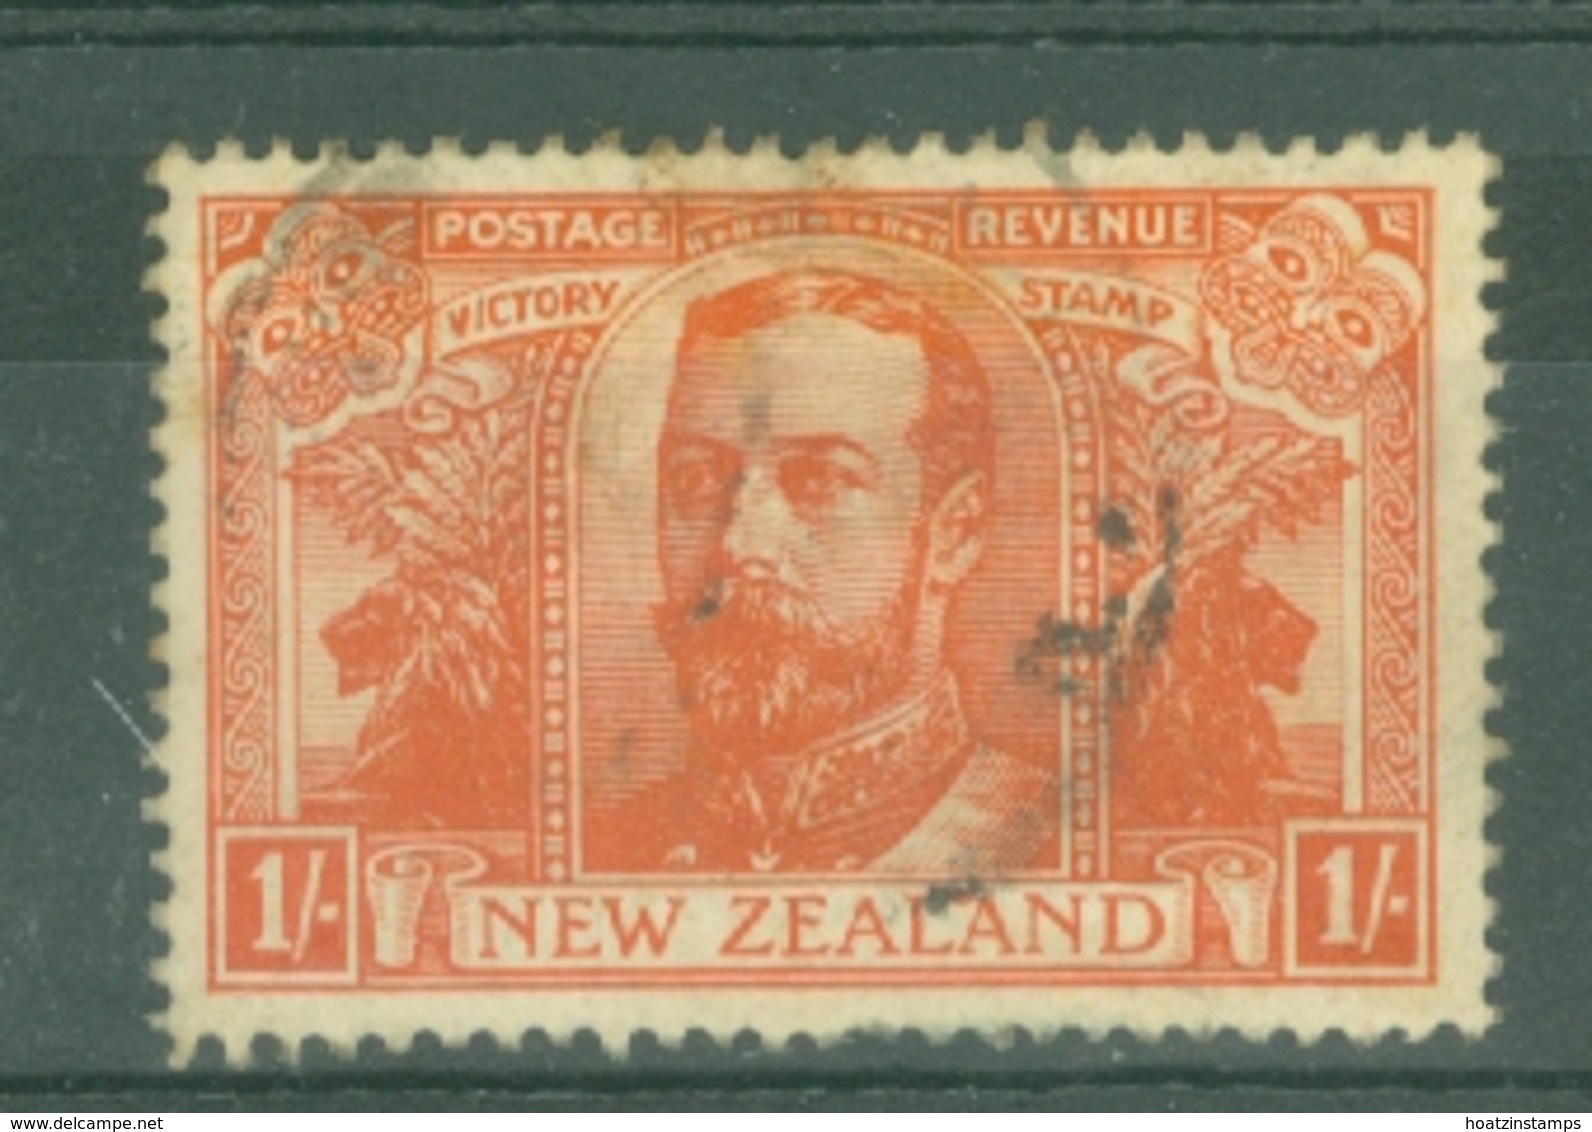 New Zealand: 1920   Victory     SG458     1/-    Used - Used Stamps